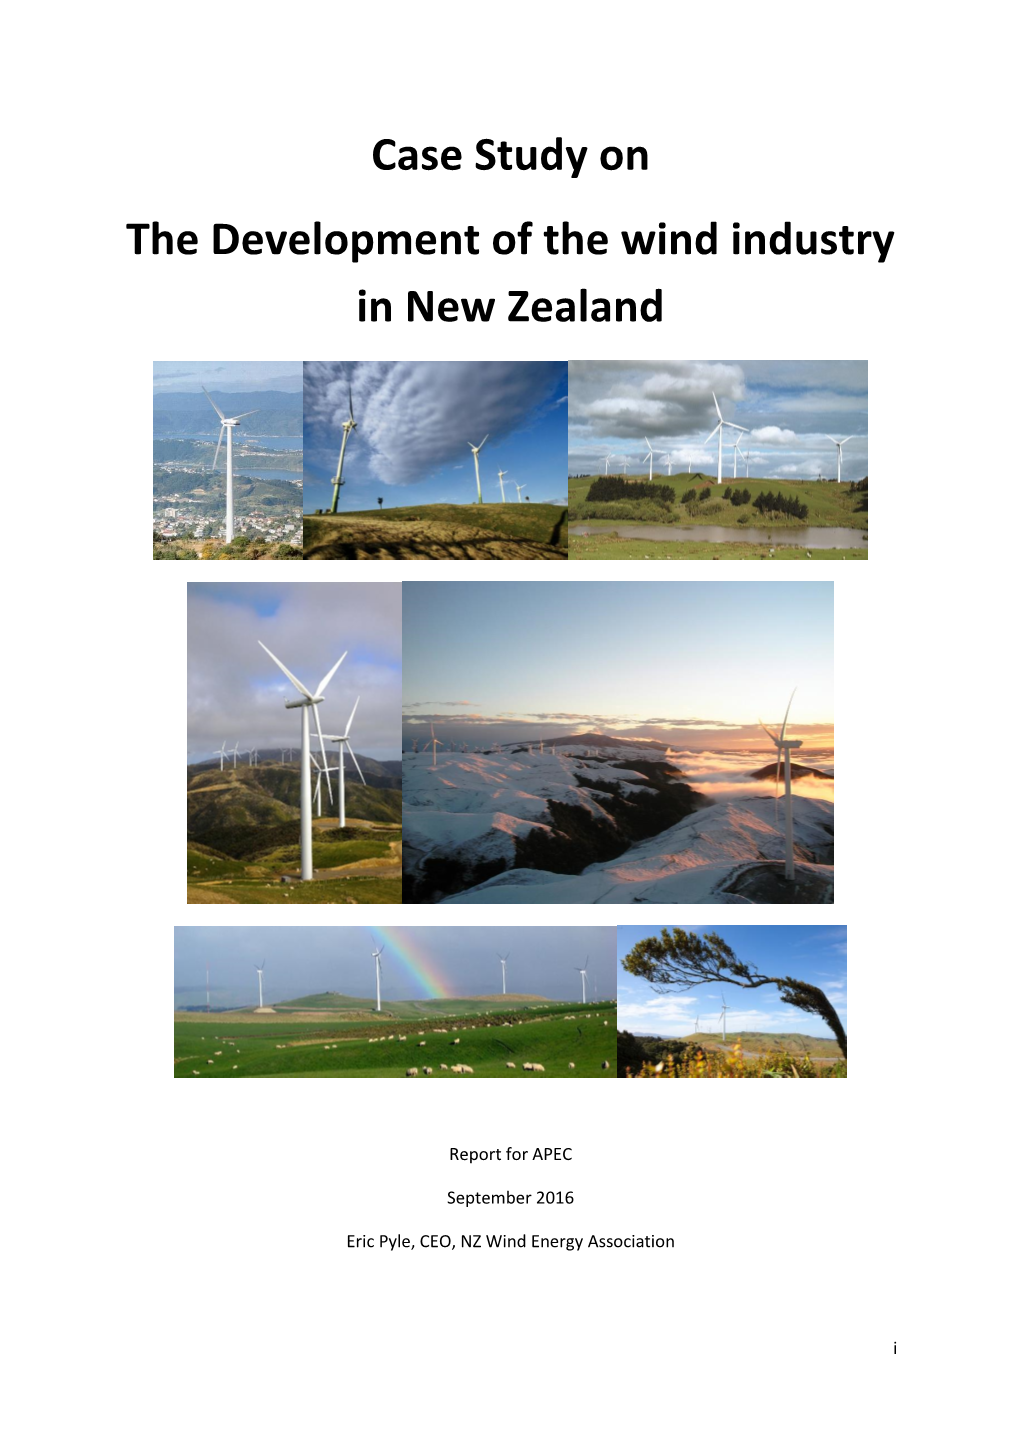 Case Study on the Development of the Wind Industry in New Zealand